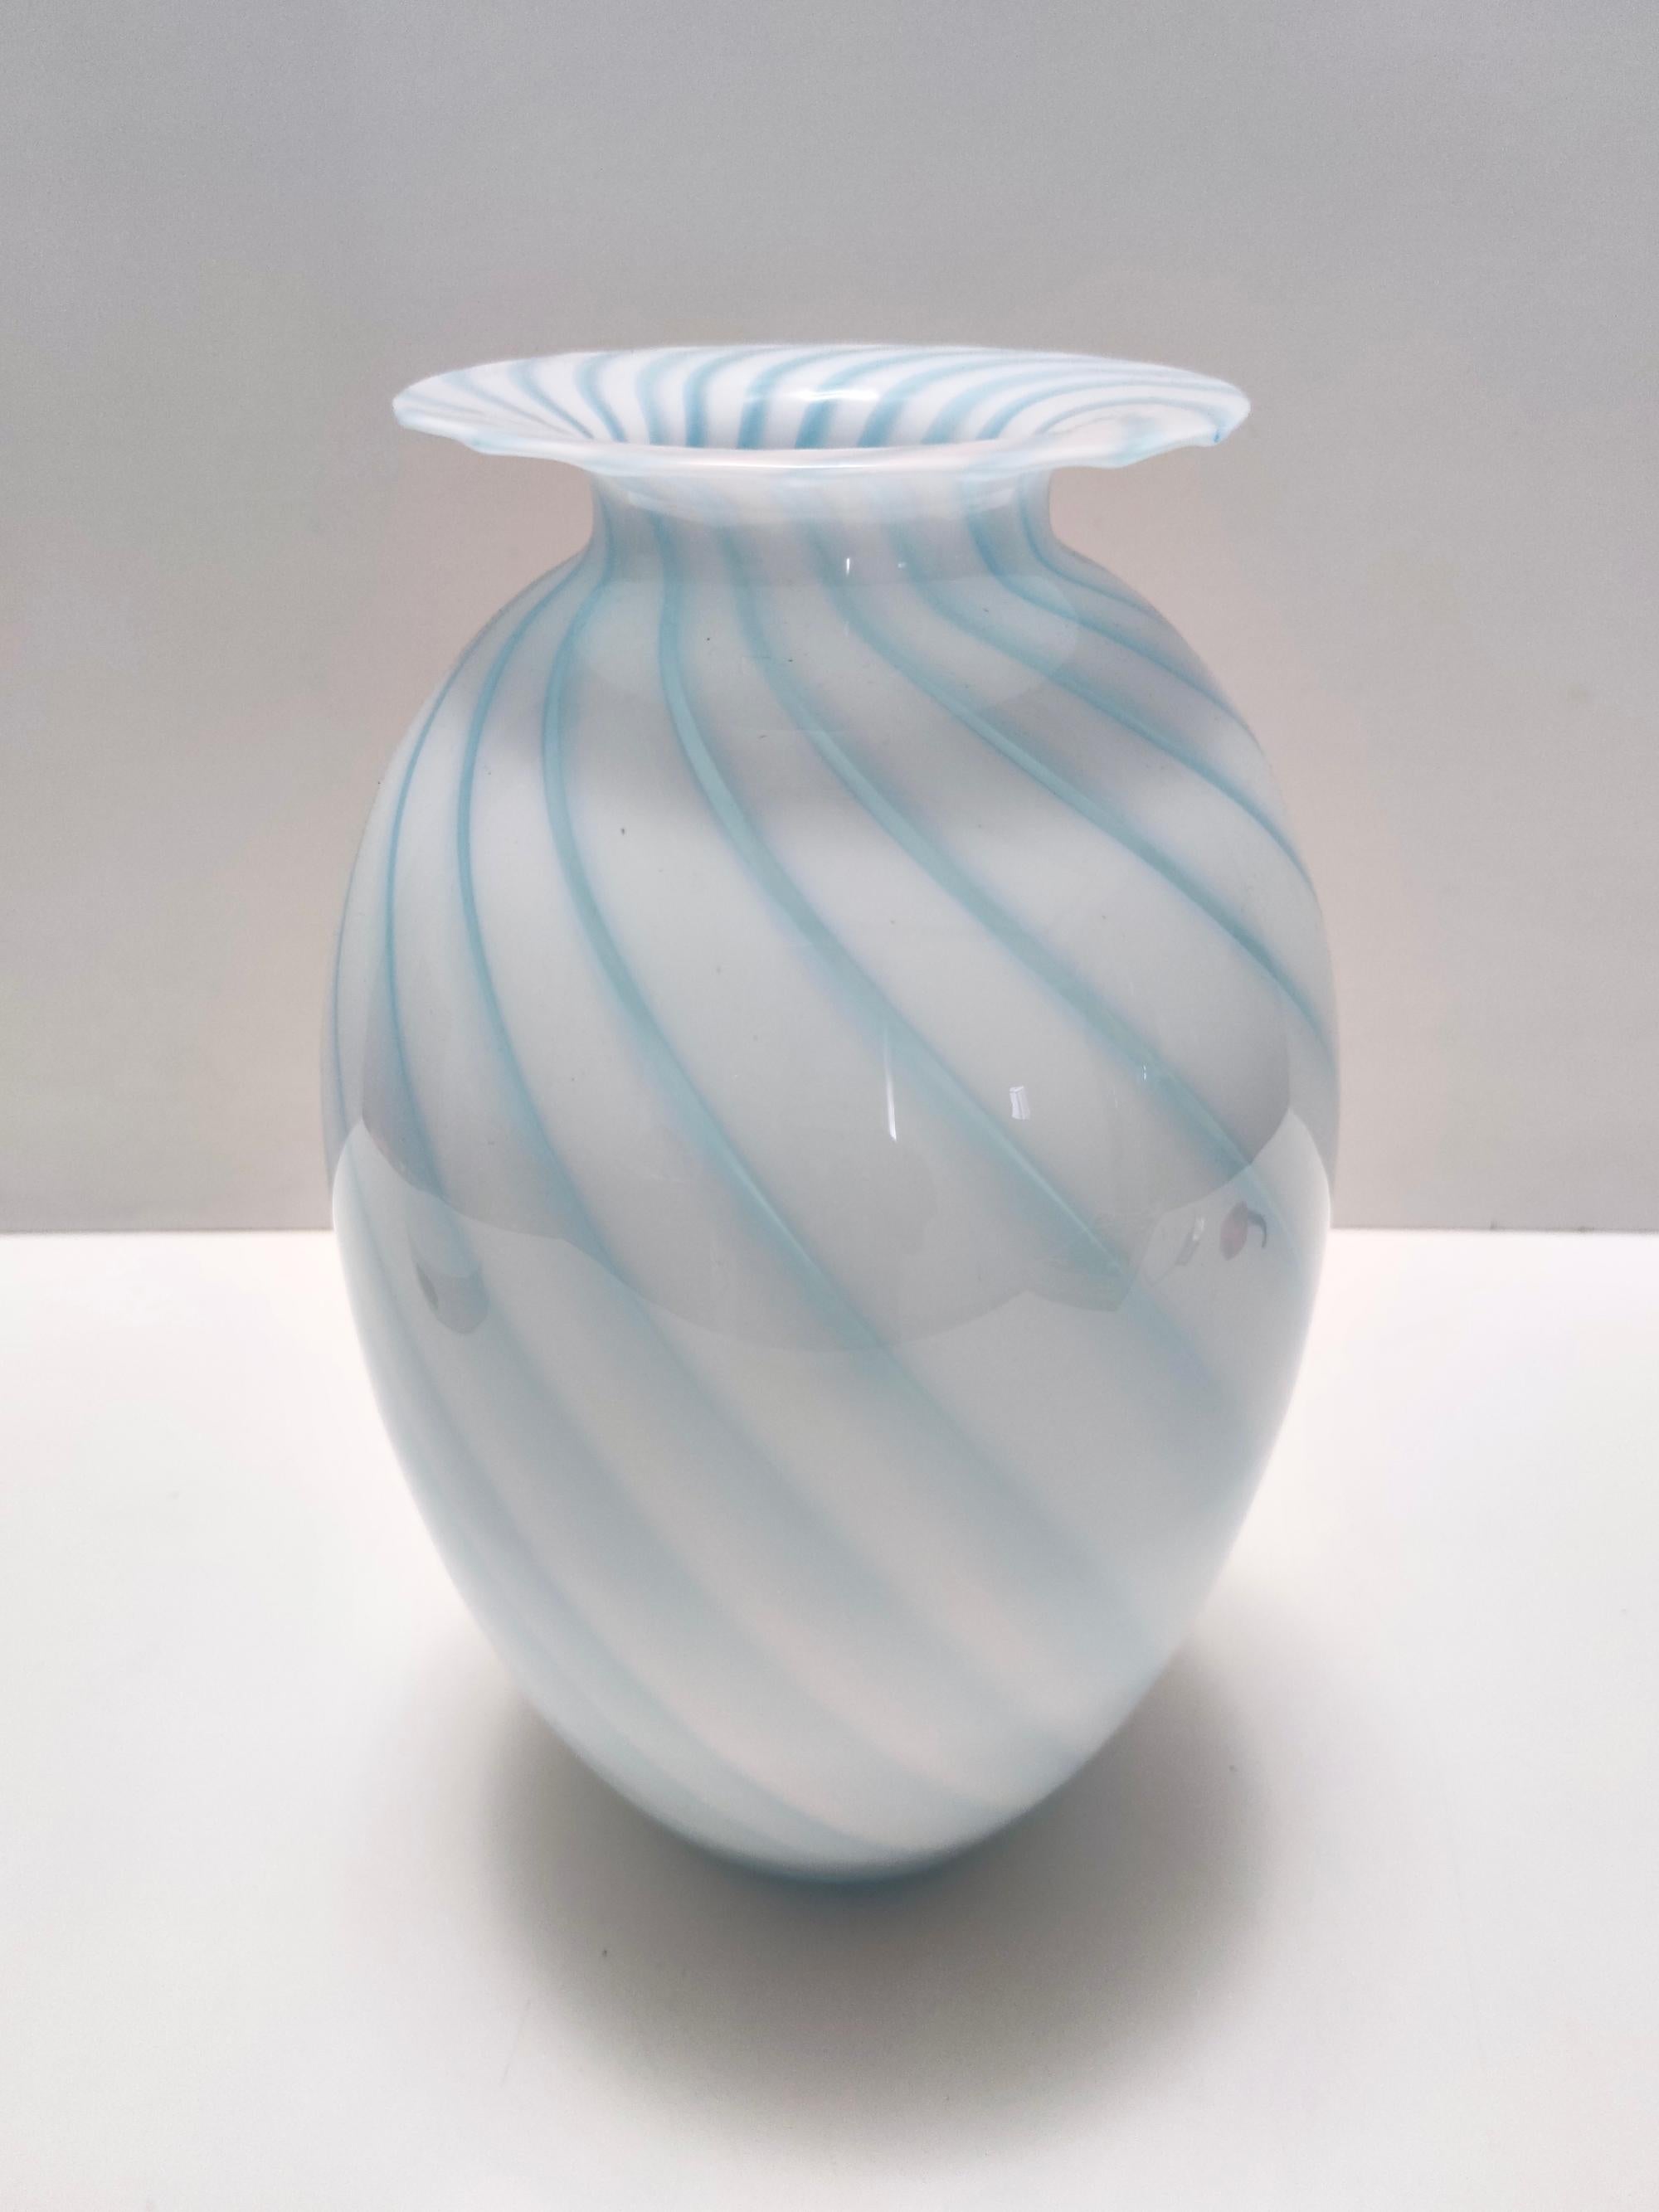 Late 20th Century Postmodern Murano Glass Vase with Light Blue and White Canes, Italy For Sale